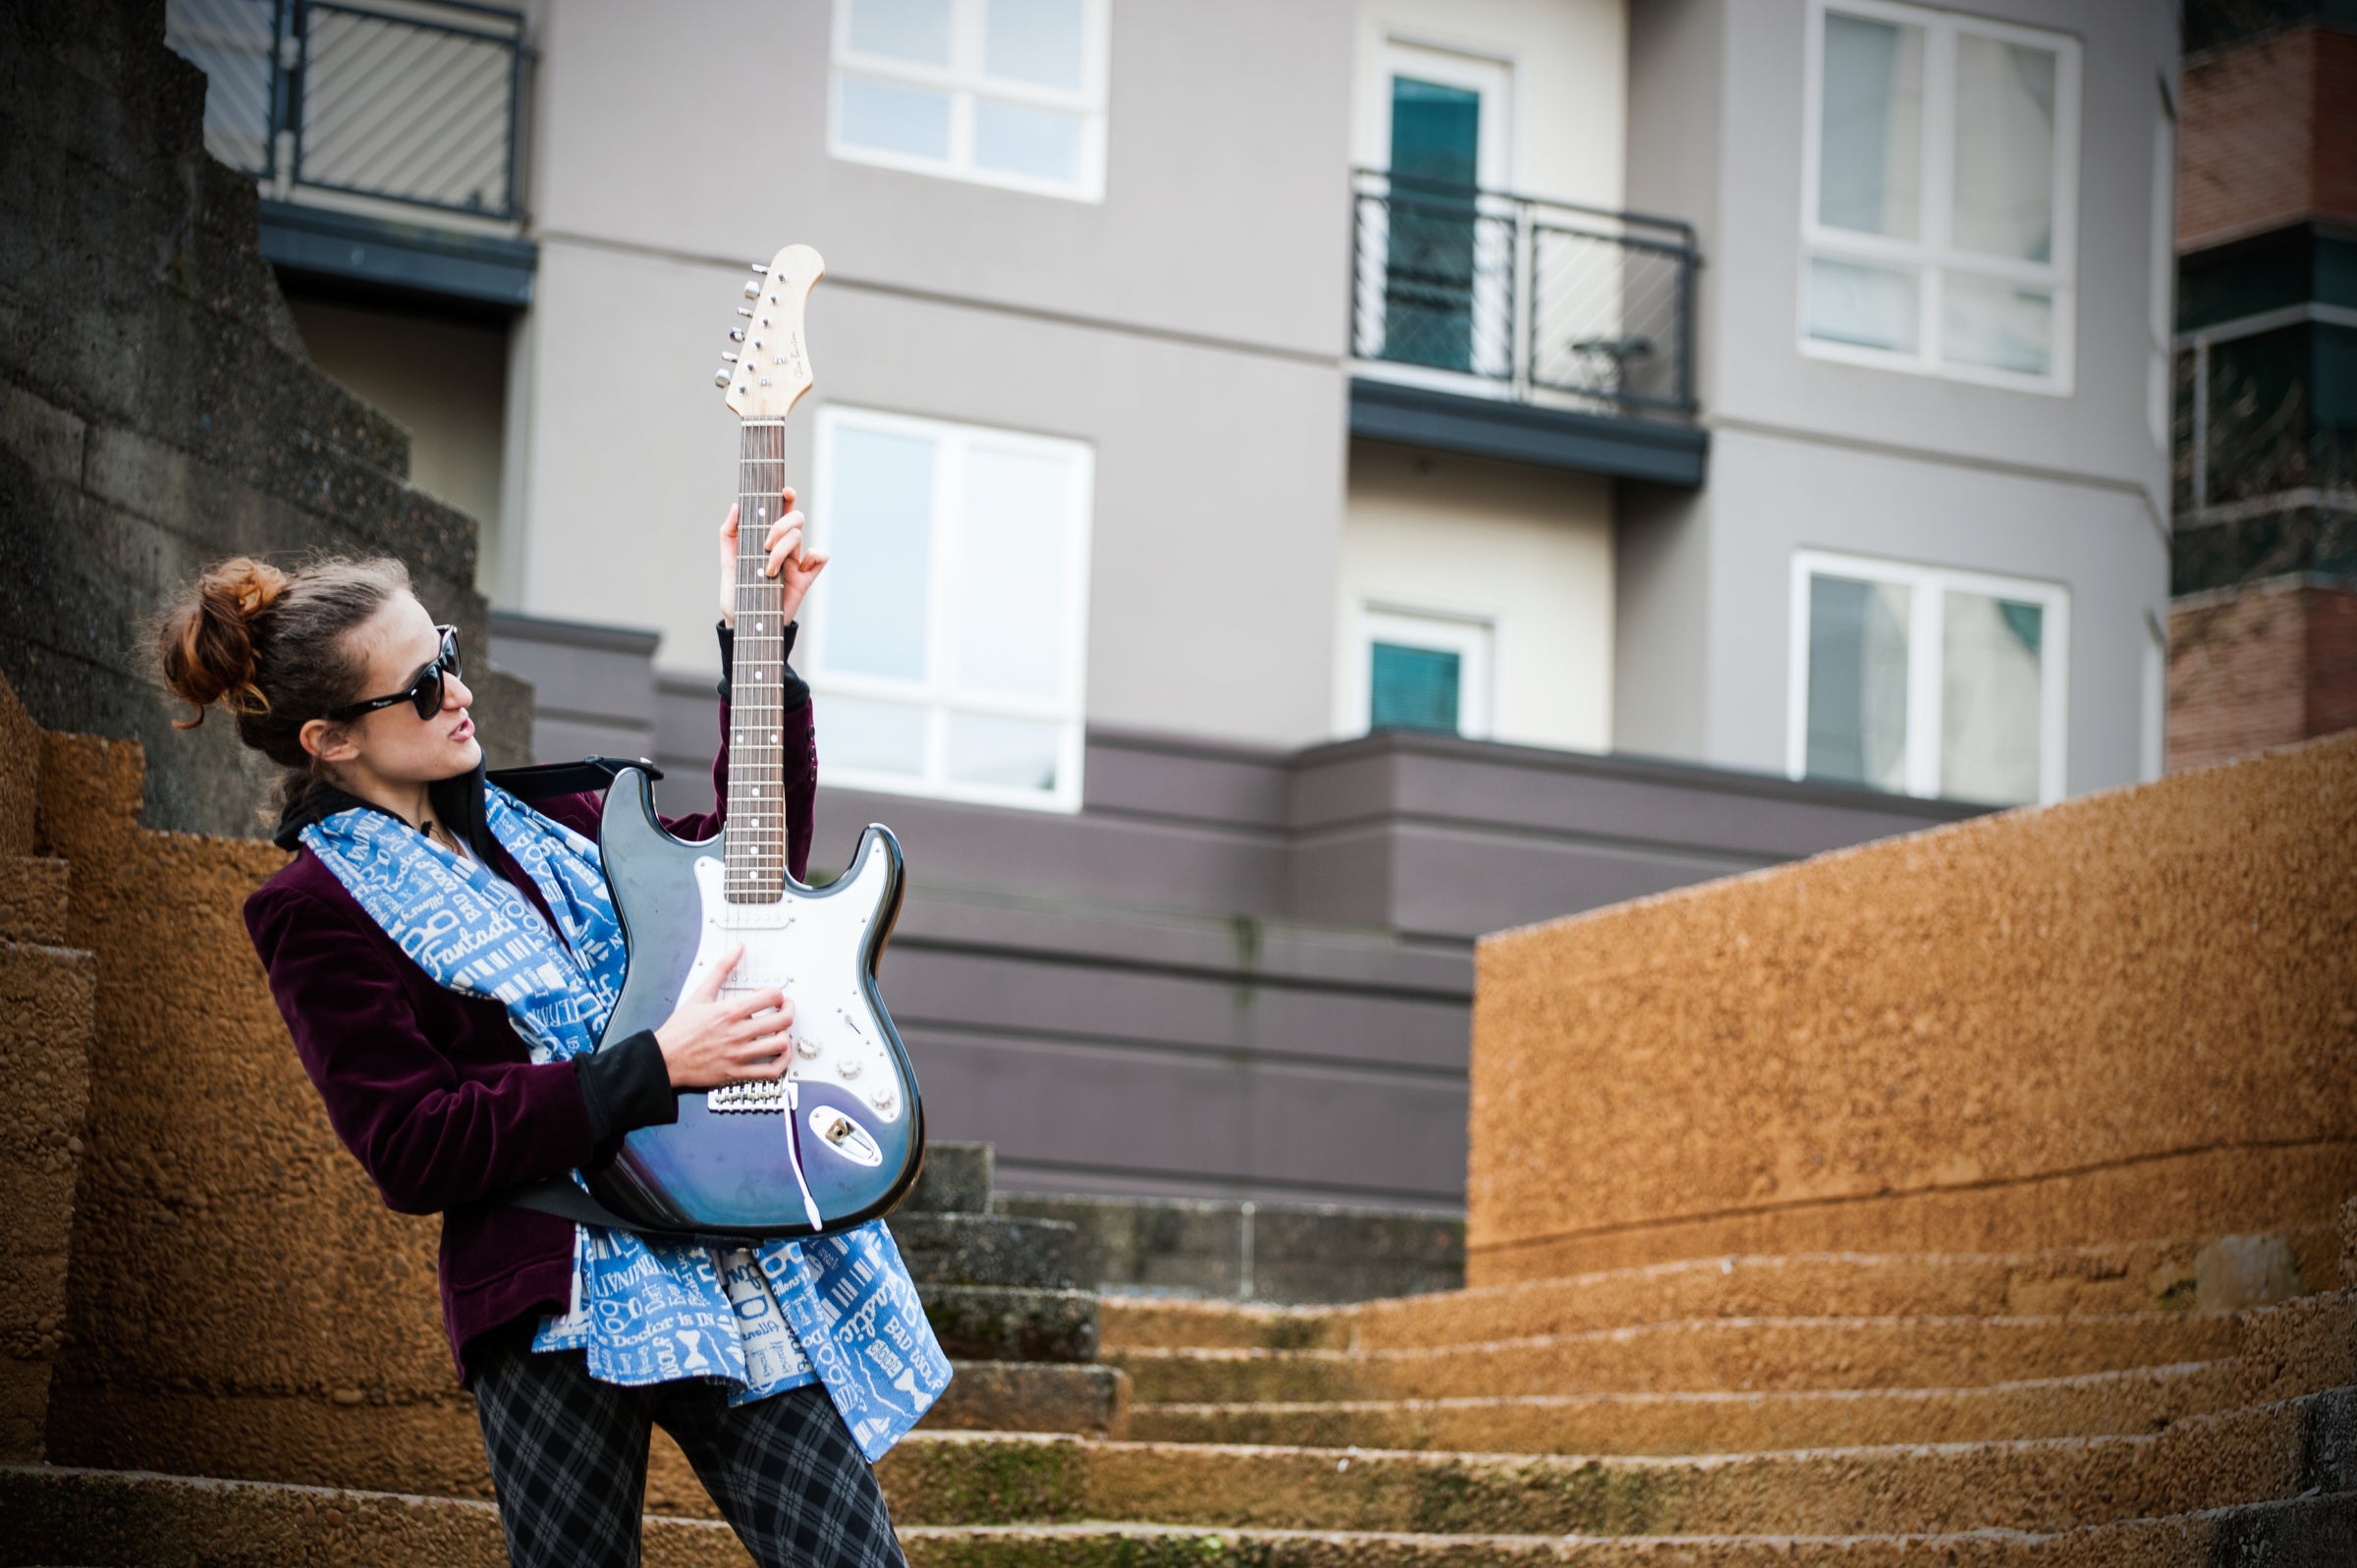 White-presenting teen girl cosplayed as the 12th Doctor from Doctor Who wears a blue and white woven fabric scarf while playing an electric guitar in front of an urban building.